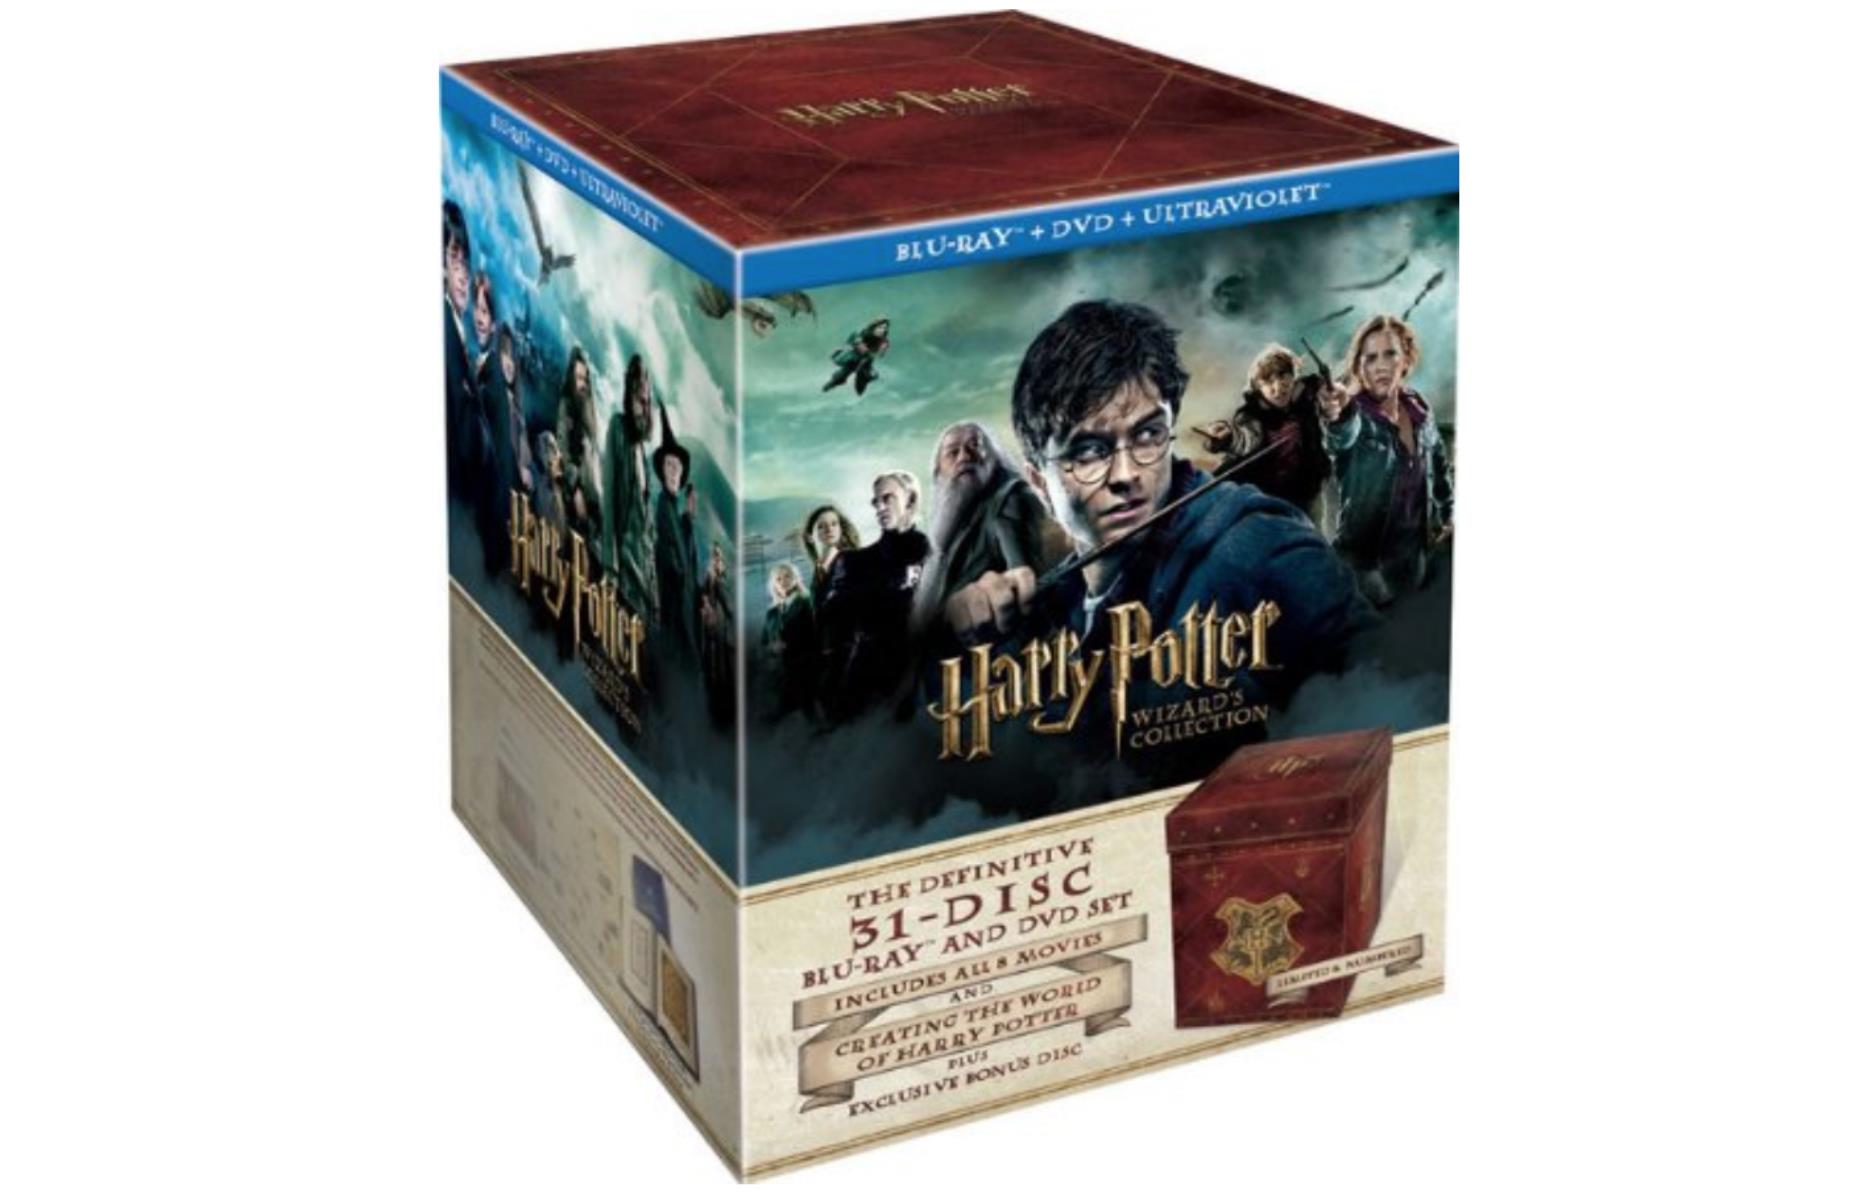 Harry Potter Wizard's Collection (Blu-ray + DVD + Ultraviolet)